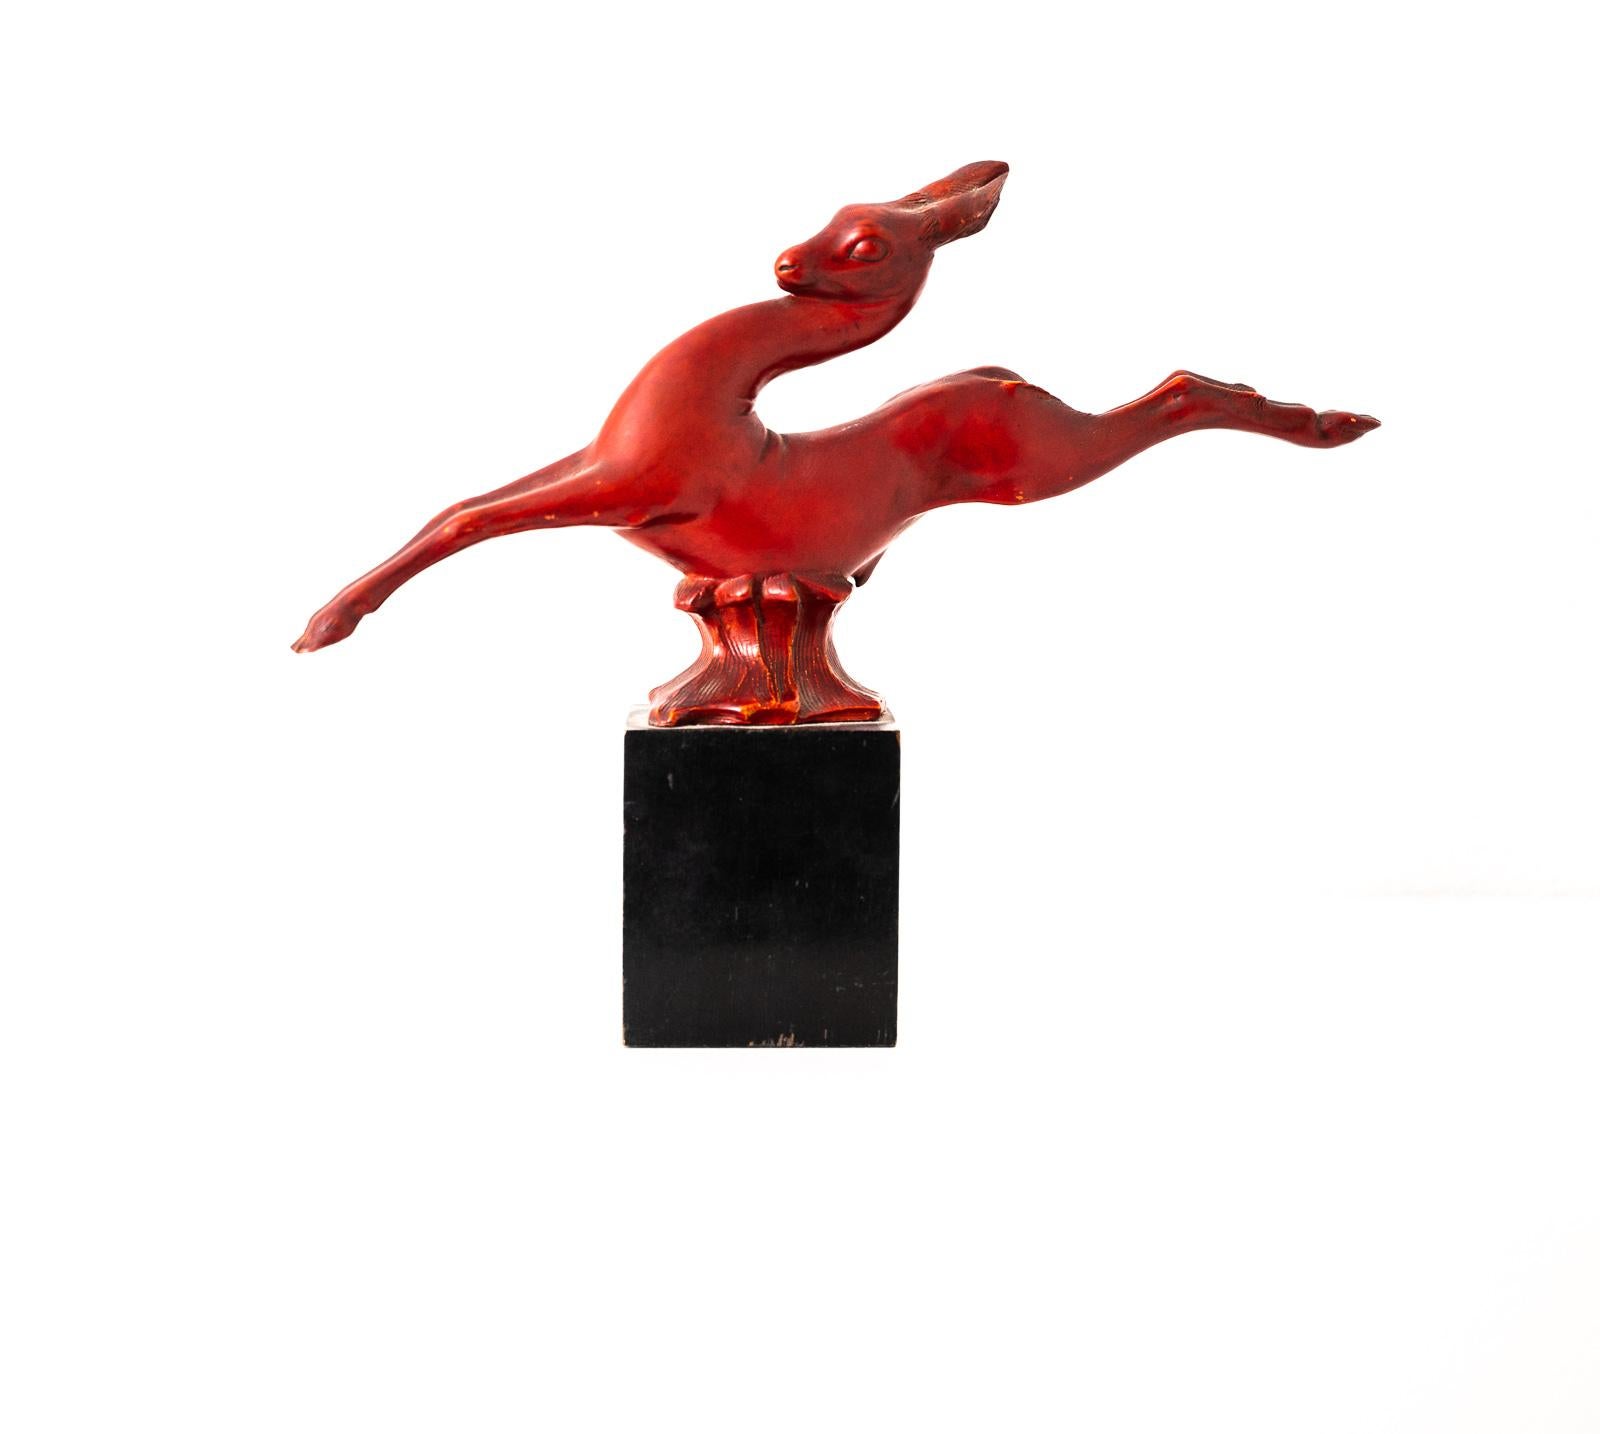 Art Deco stoneware sculpture of an antelope enameled in red. 

Signature engraved: G. Cacciapuoti, stamped “Fabrique en Italie” to the socle, labels to the base.

Bibliography: AA.VV. Le ceramiche di Cacciapuoti da Napoli a Milano 1870-1953,